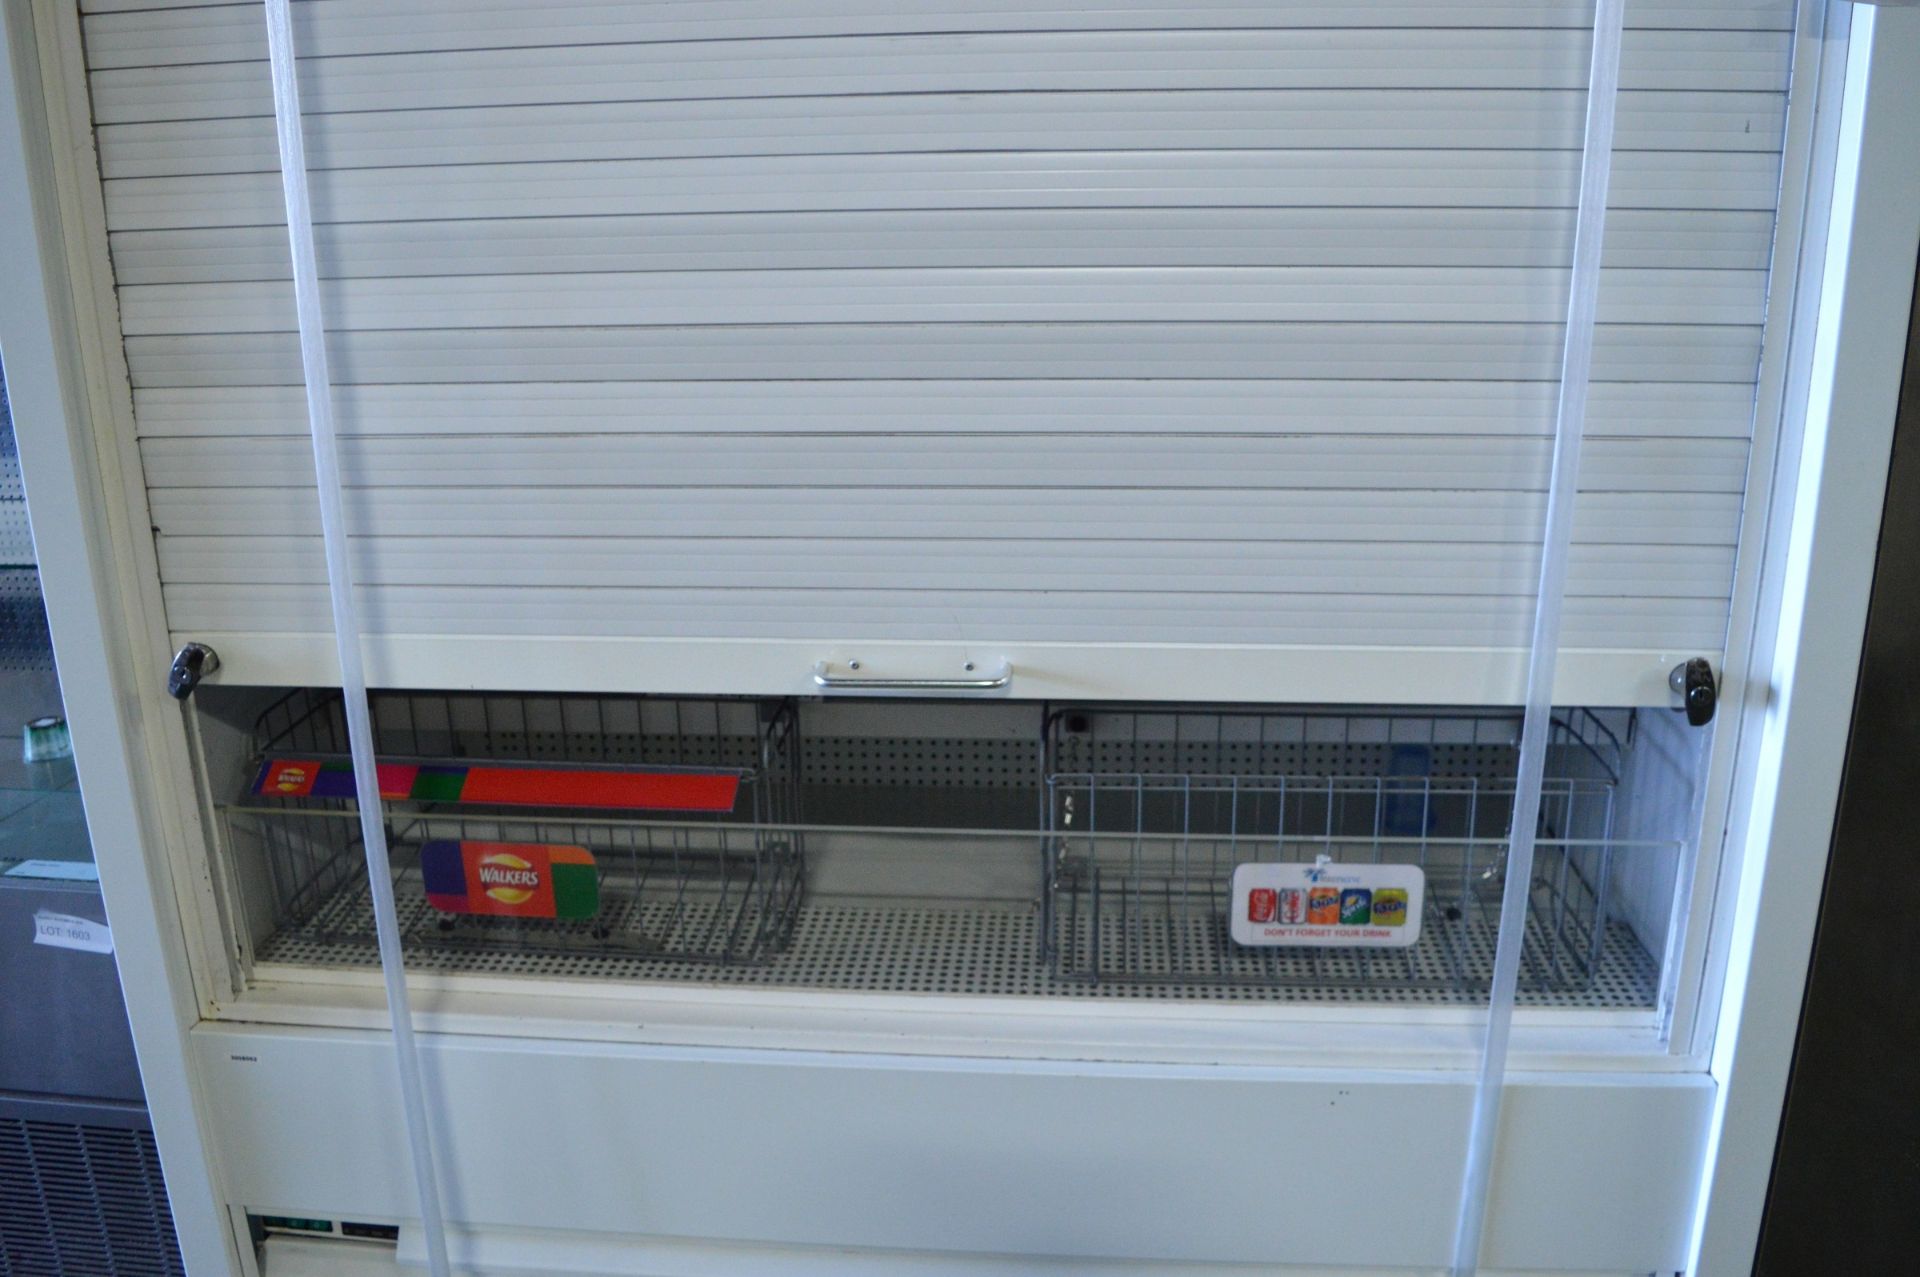 SZA20530-ScanFrost Refrigerated Display Cabinet - L1500 x W760 x H1900mm - Image 3 of 5